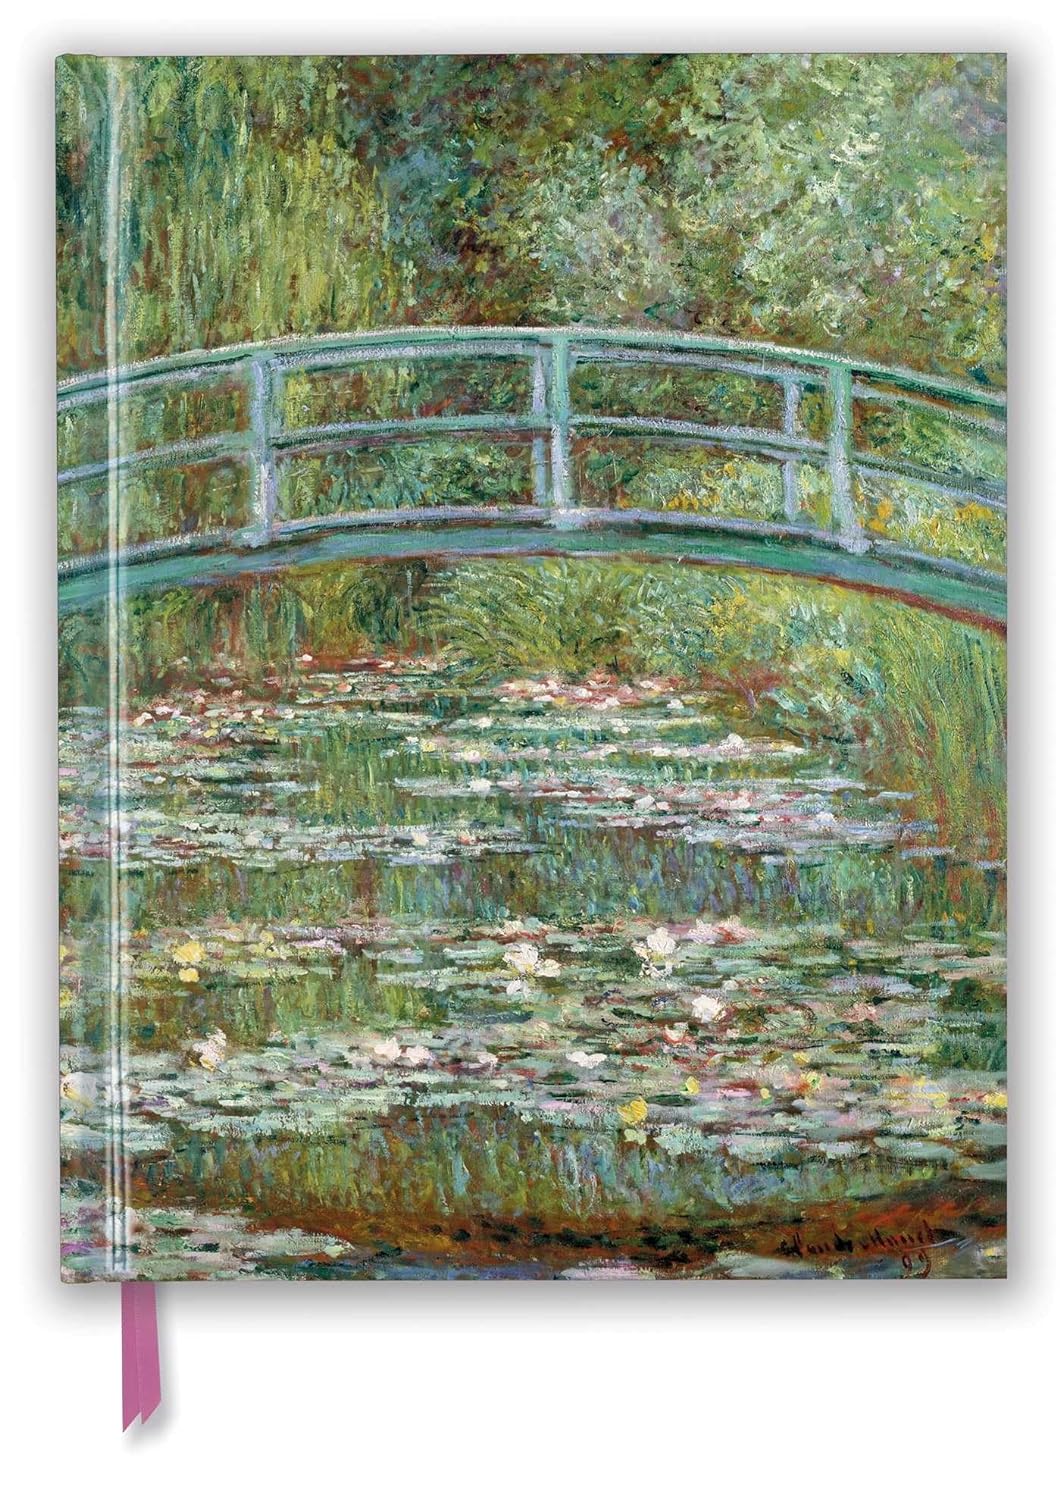 Claude Monet: Bridge Over A Pond For Water Liies Notebooks